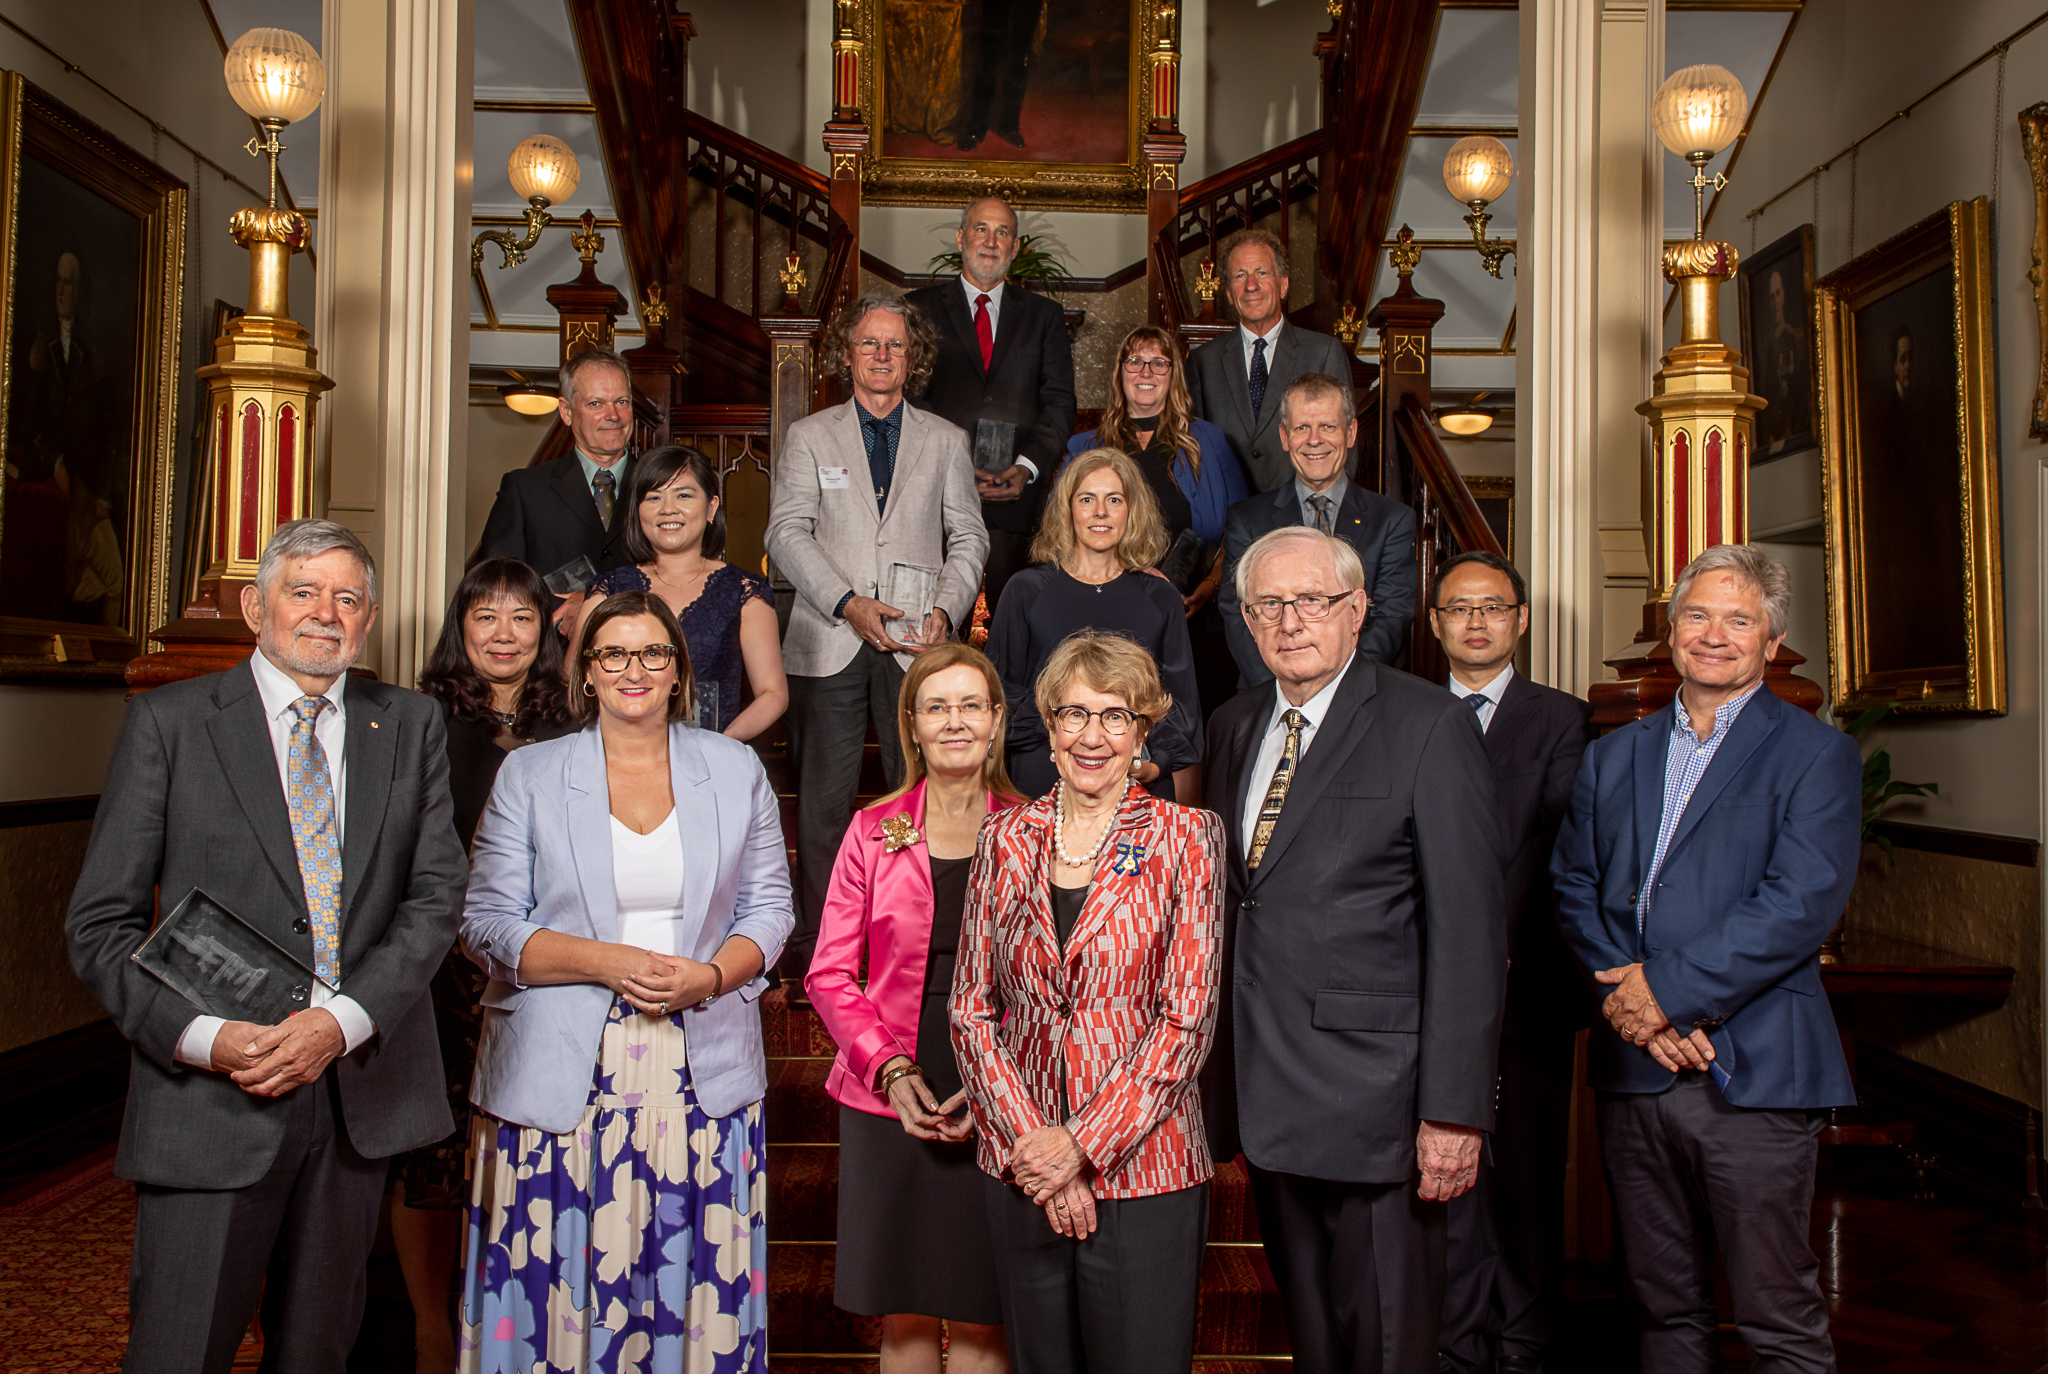 The Governor, Mr Dennis Wilson, the Hon. Gabrielle Upton, the Hon. Sarah Mitchell, the NSW Chief Scientist & Engineer, Scientist of the Year Professor Jim Patrick and the category winners from the 2021 Premier's Prizes for Science & Engineering.